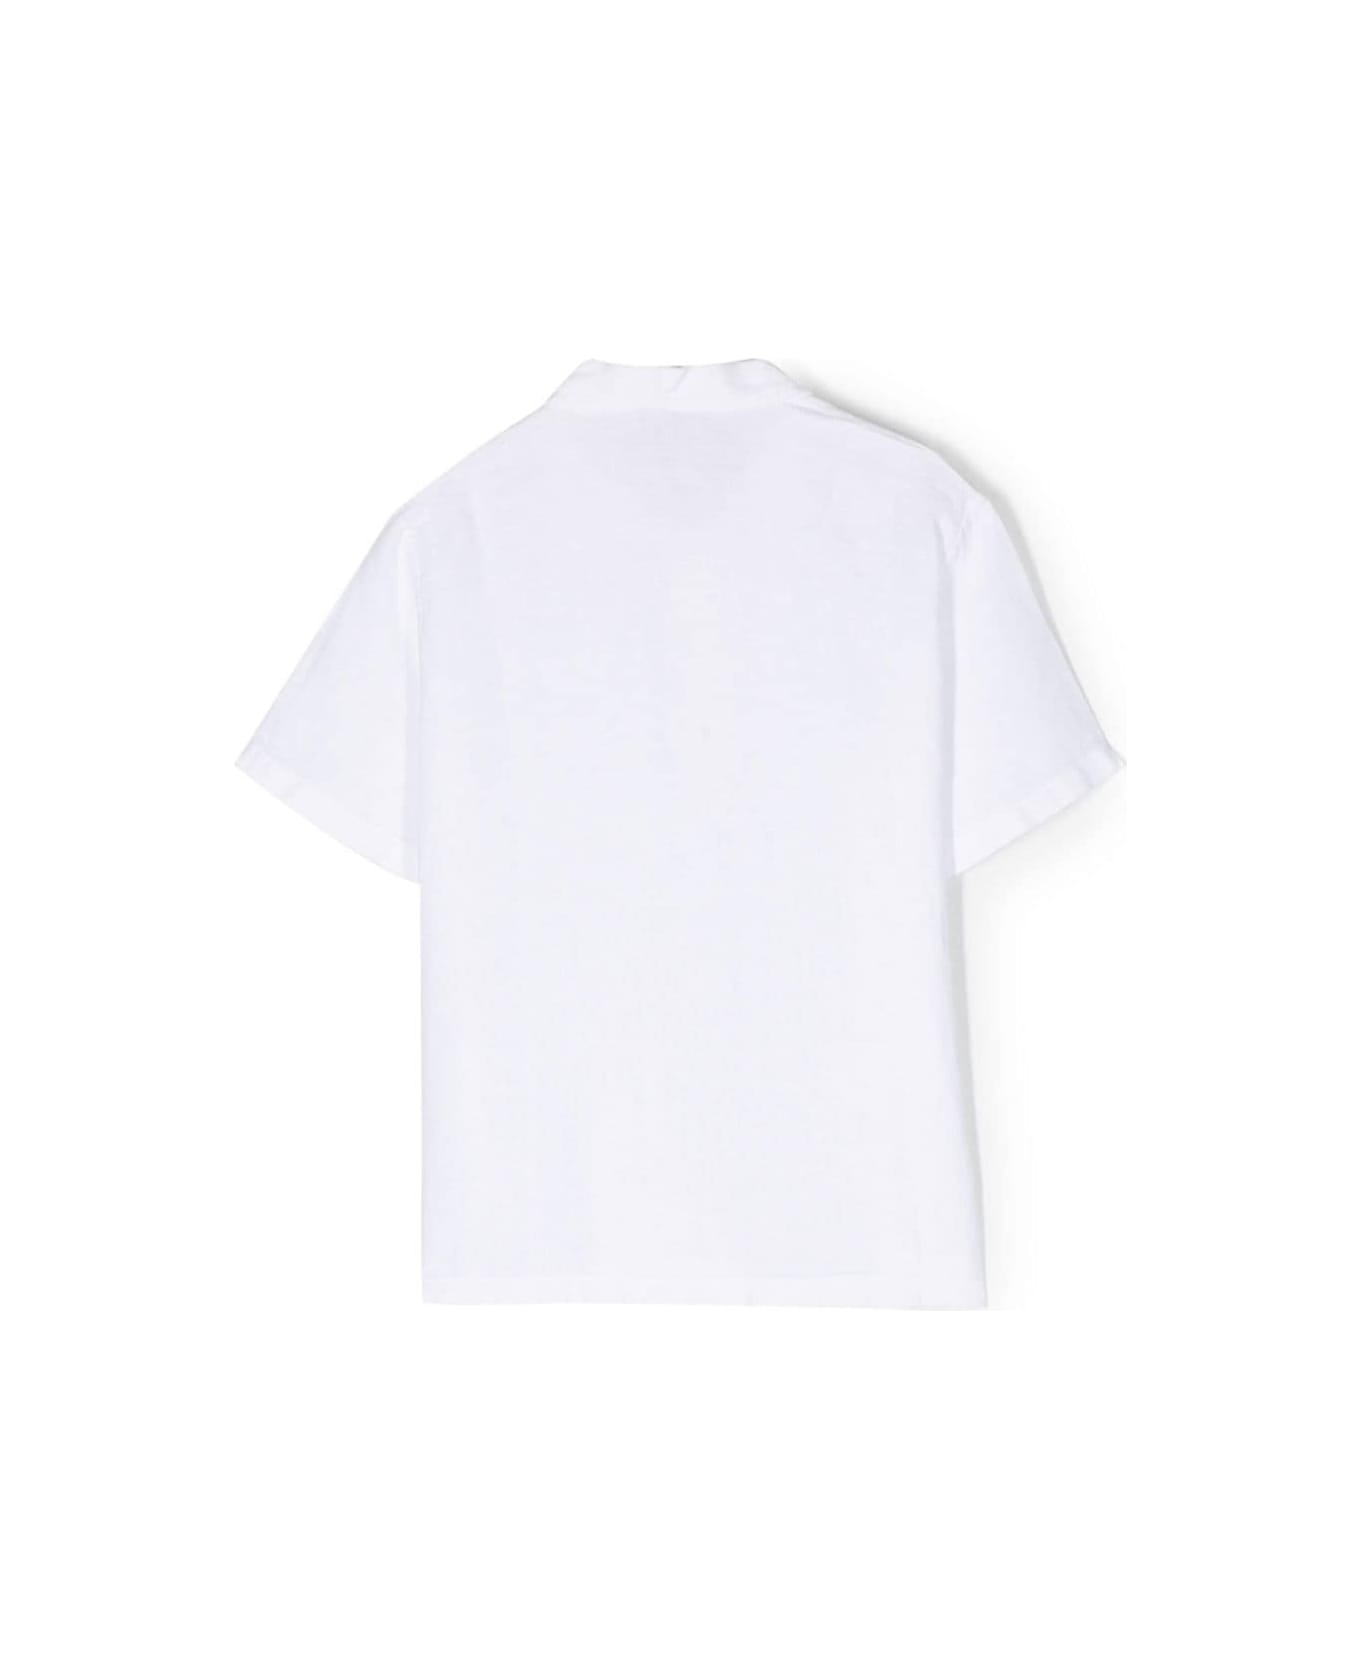 Il Gufo White Polo Shirt With Short Sleeves In Linen Boy - White